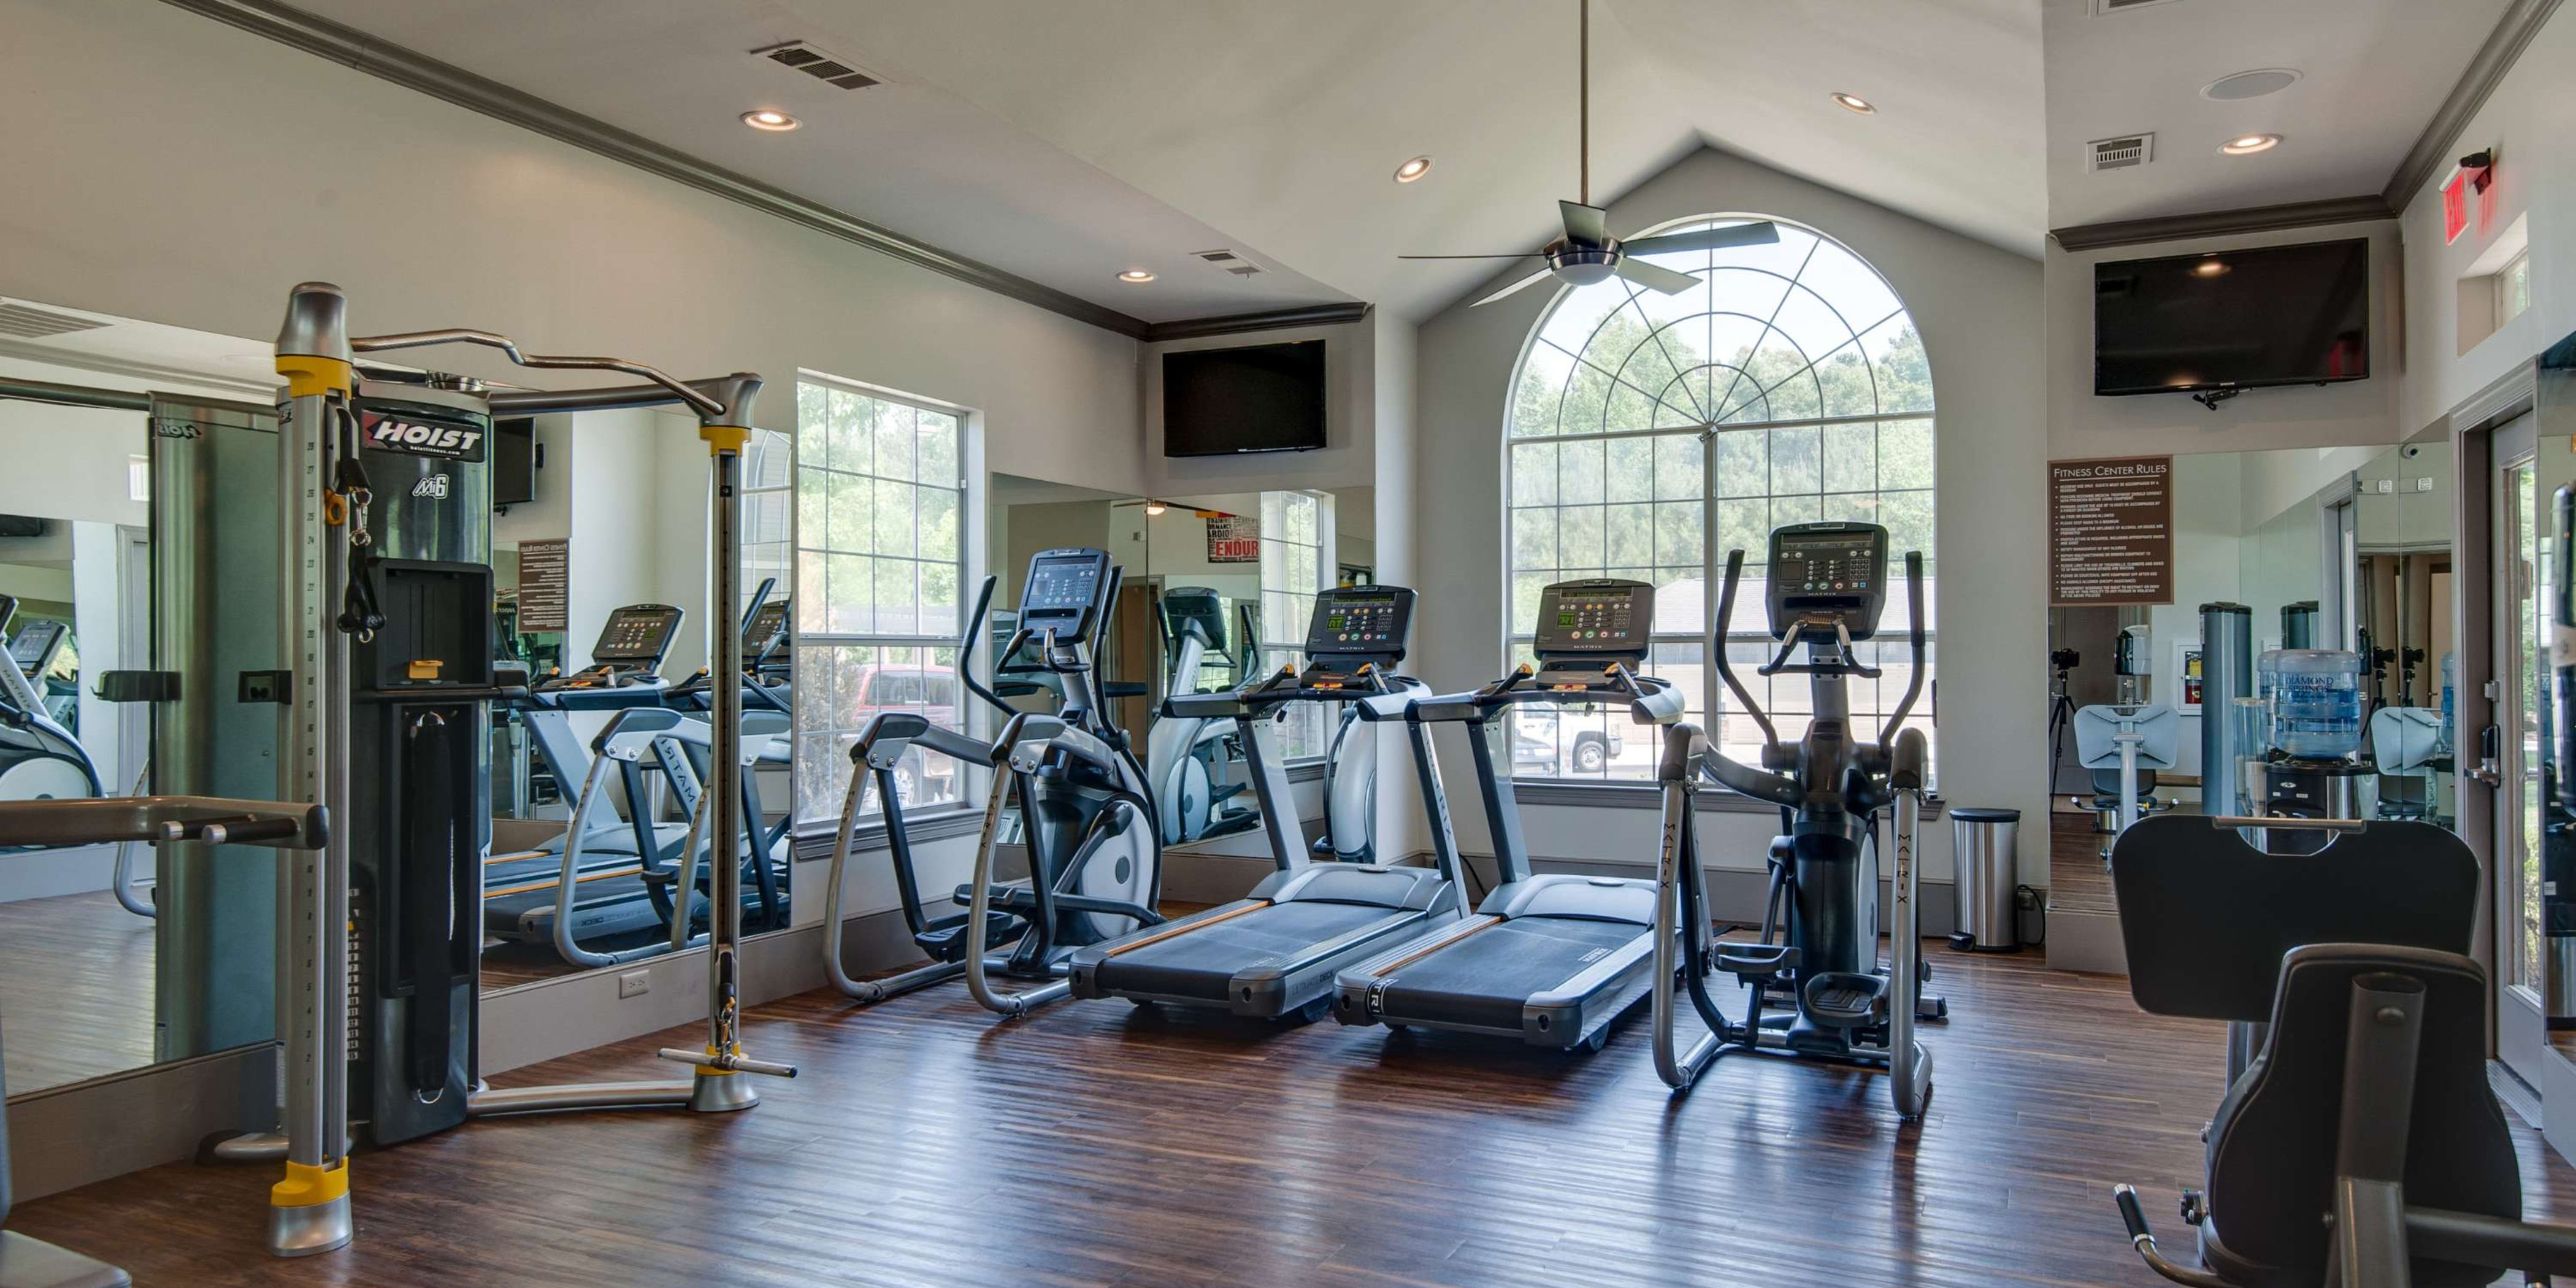 Fitness center at Legacy at Meridian in Durham, North Carolina